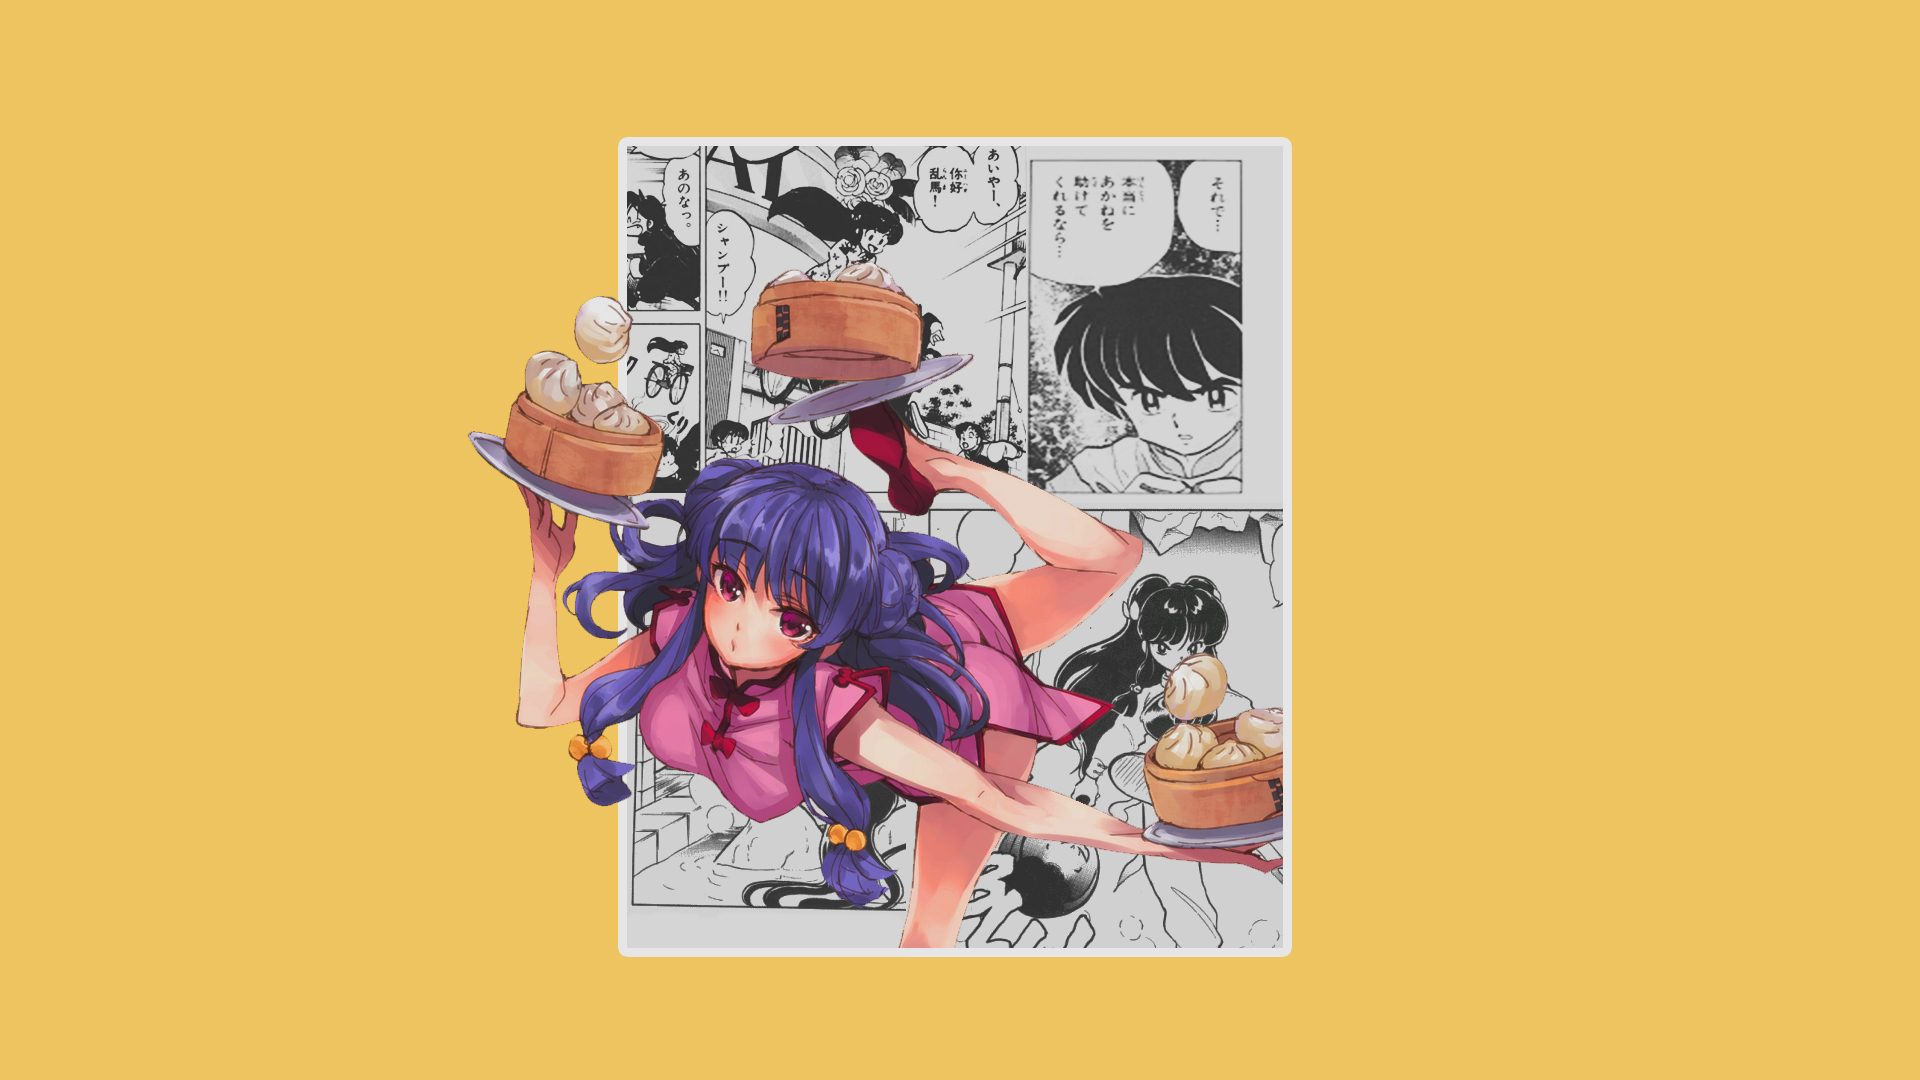 Anime 1920x1080 anime anime girls Ranma ½ Shampoo manga picture-in-picture simple background yellow background collage tight clothing waitress purple hair legs dumplings